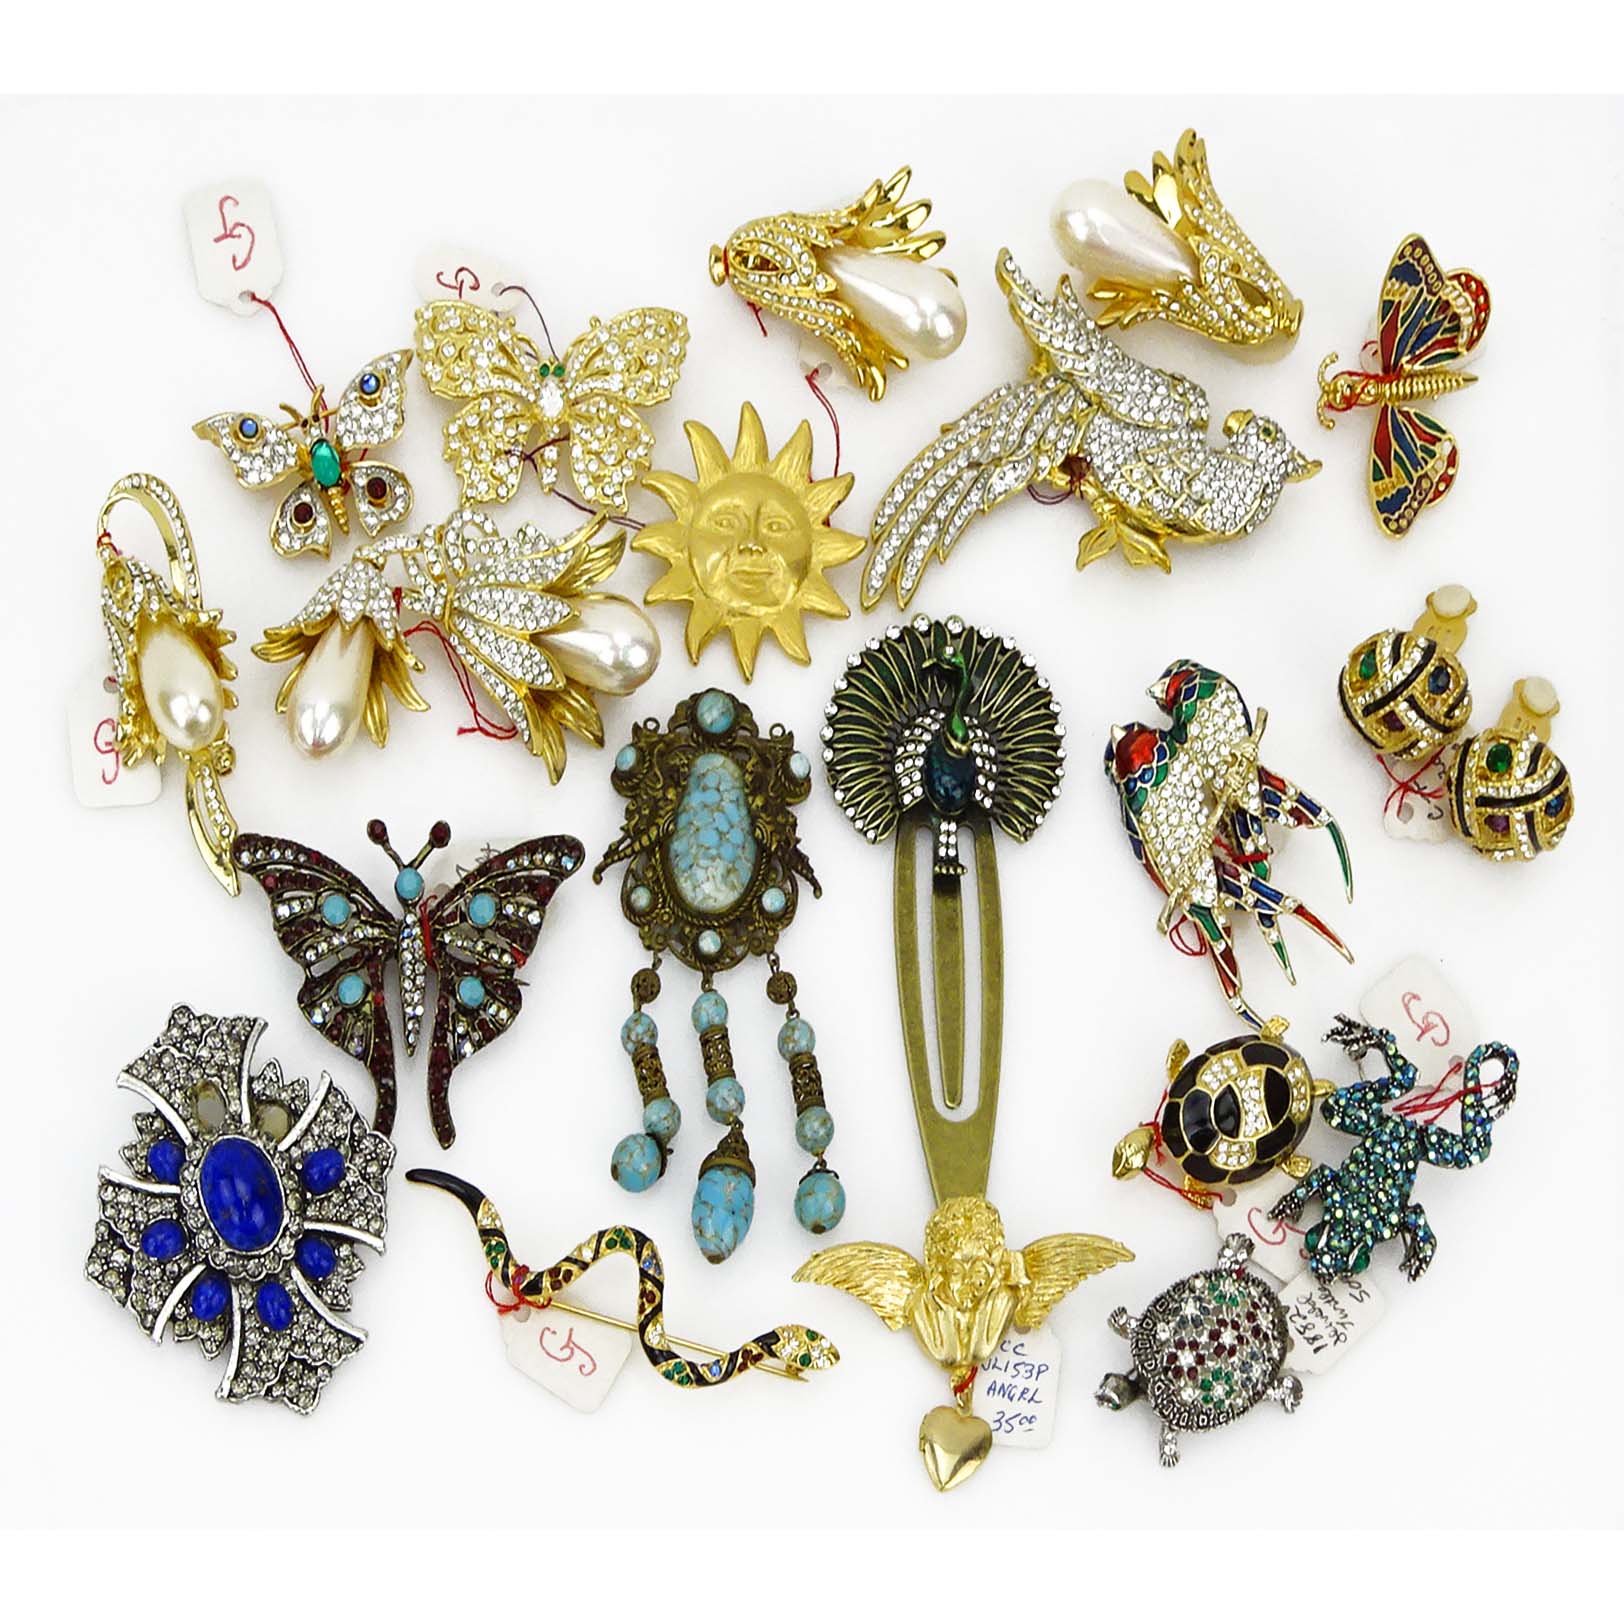 Collection of High Quality Costume Jewelry.